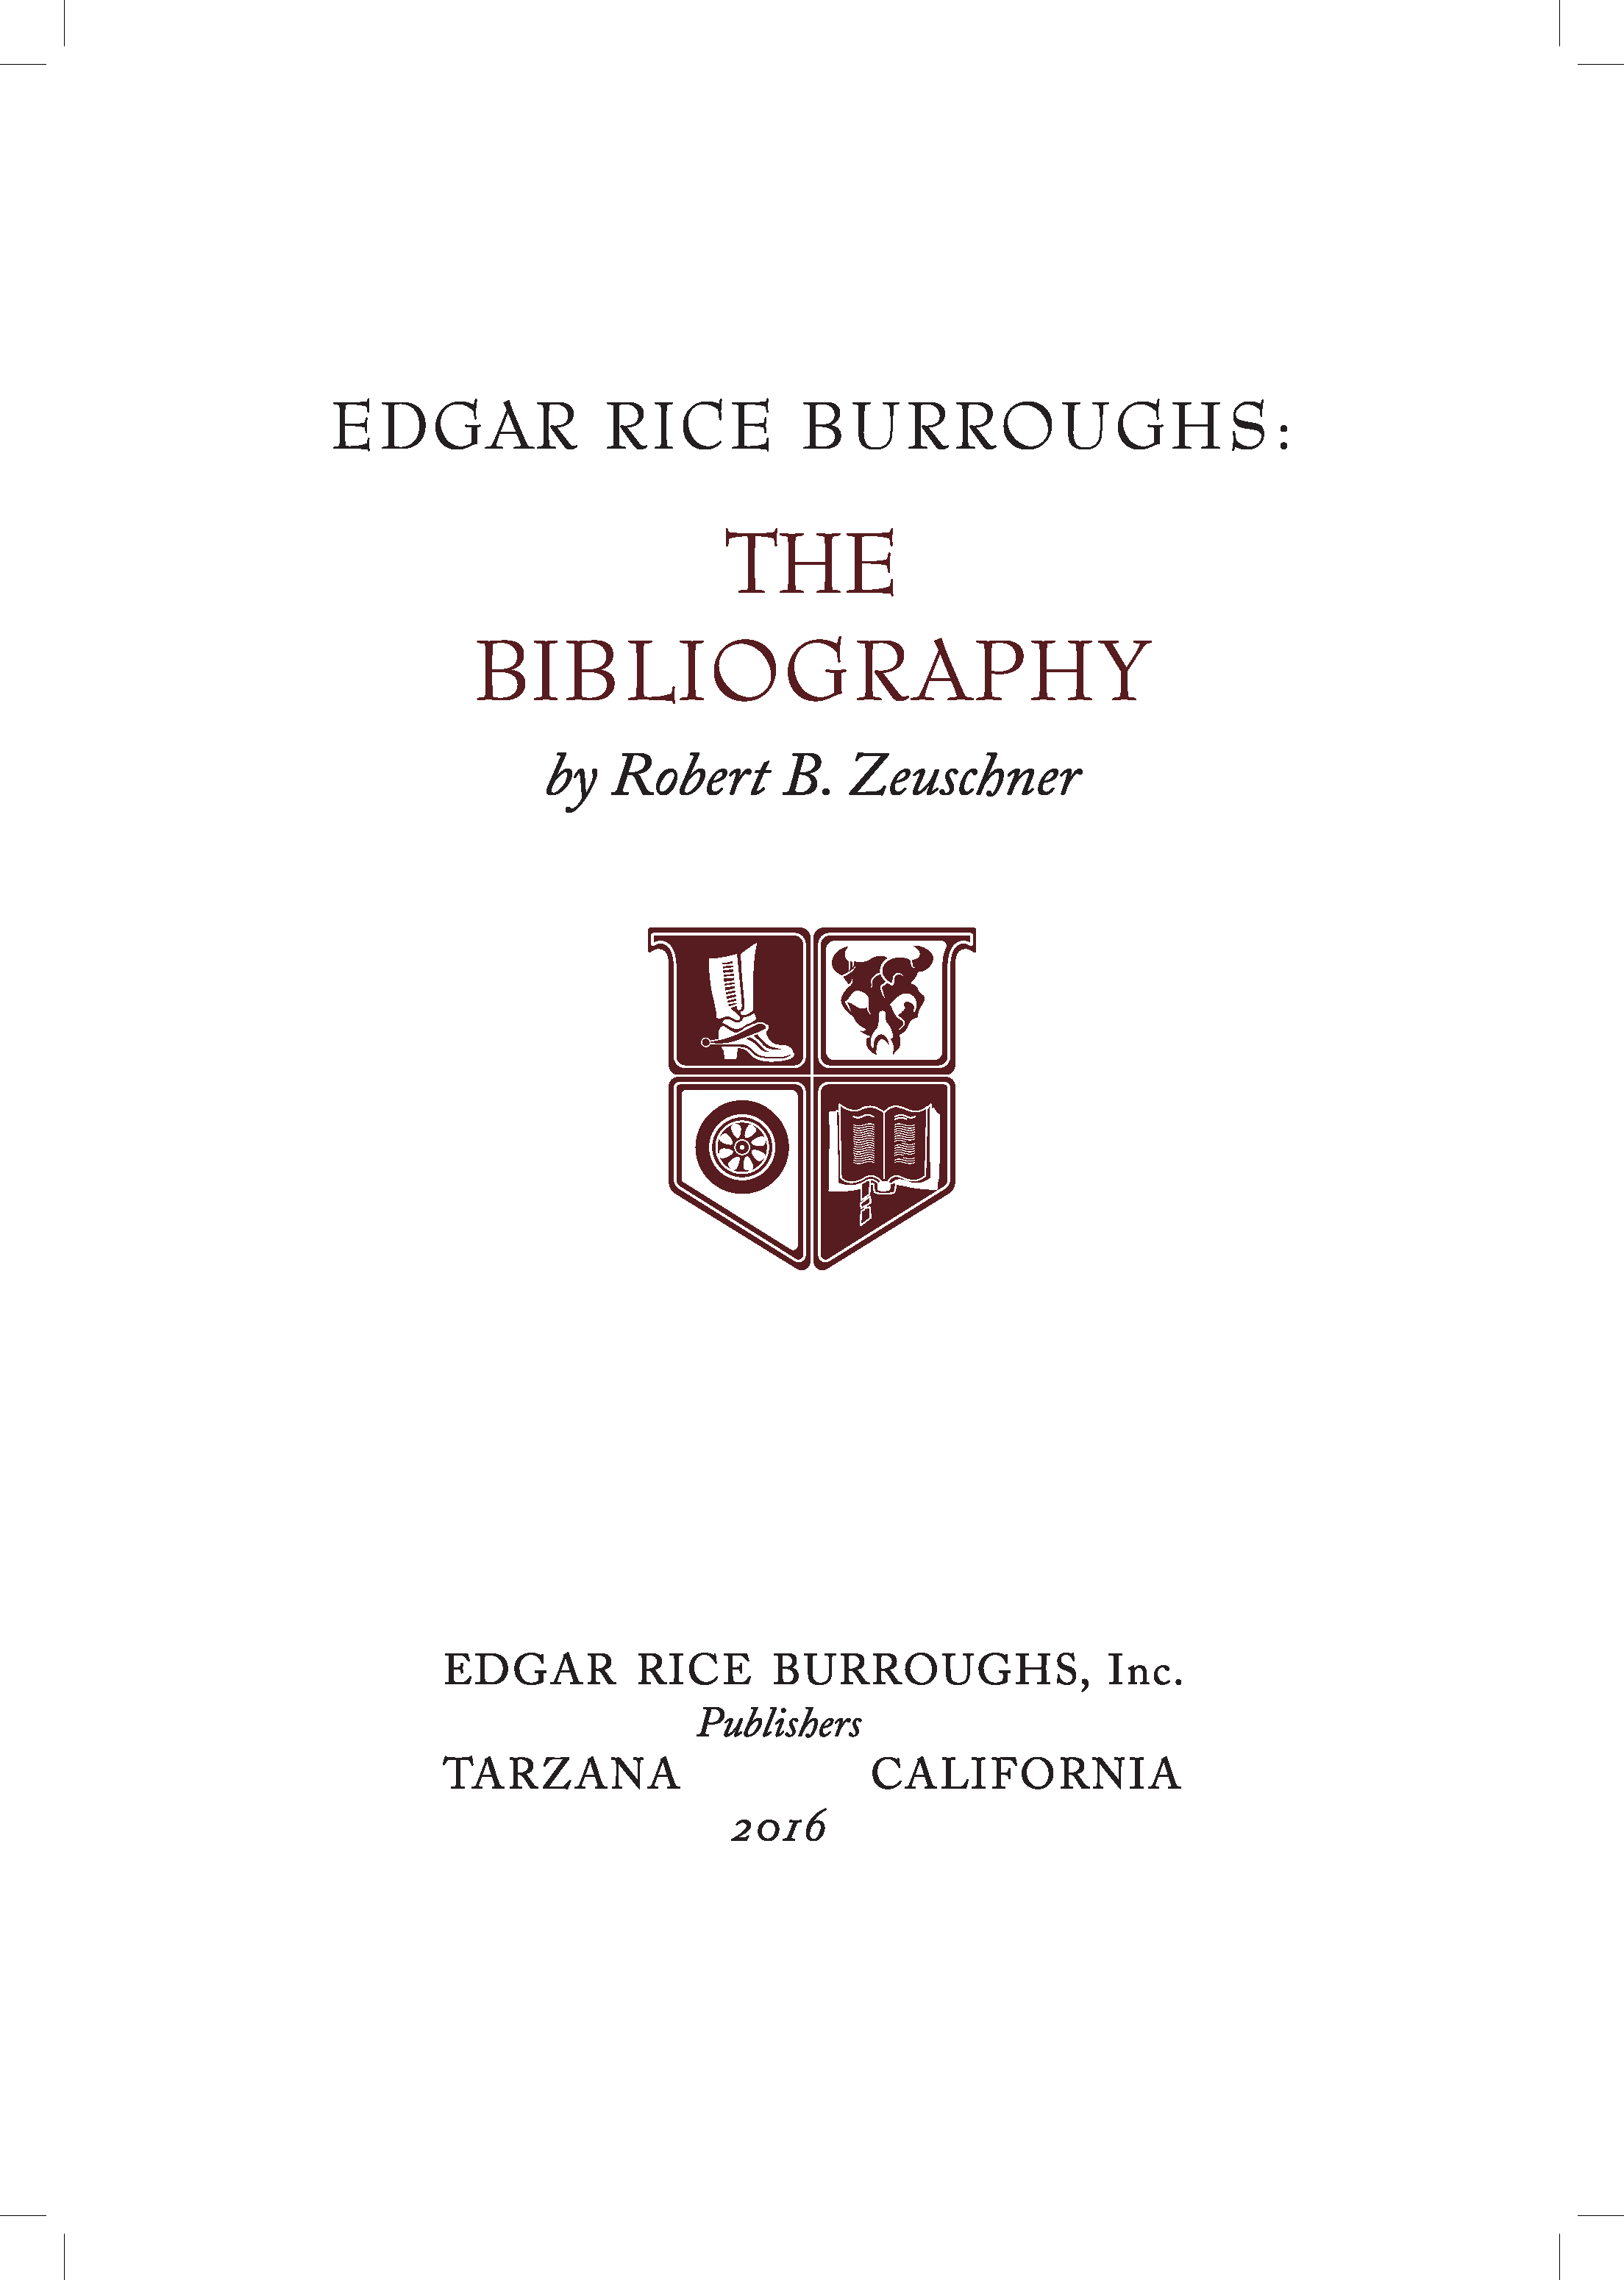 Title page for Edgar Rice Burroughs: The Bibliography